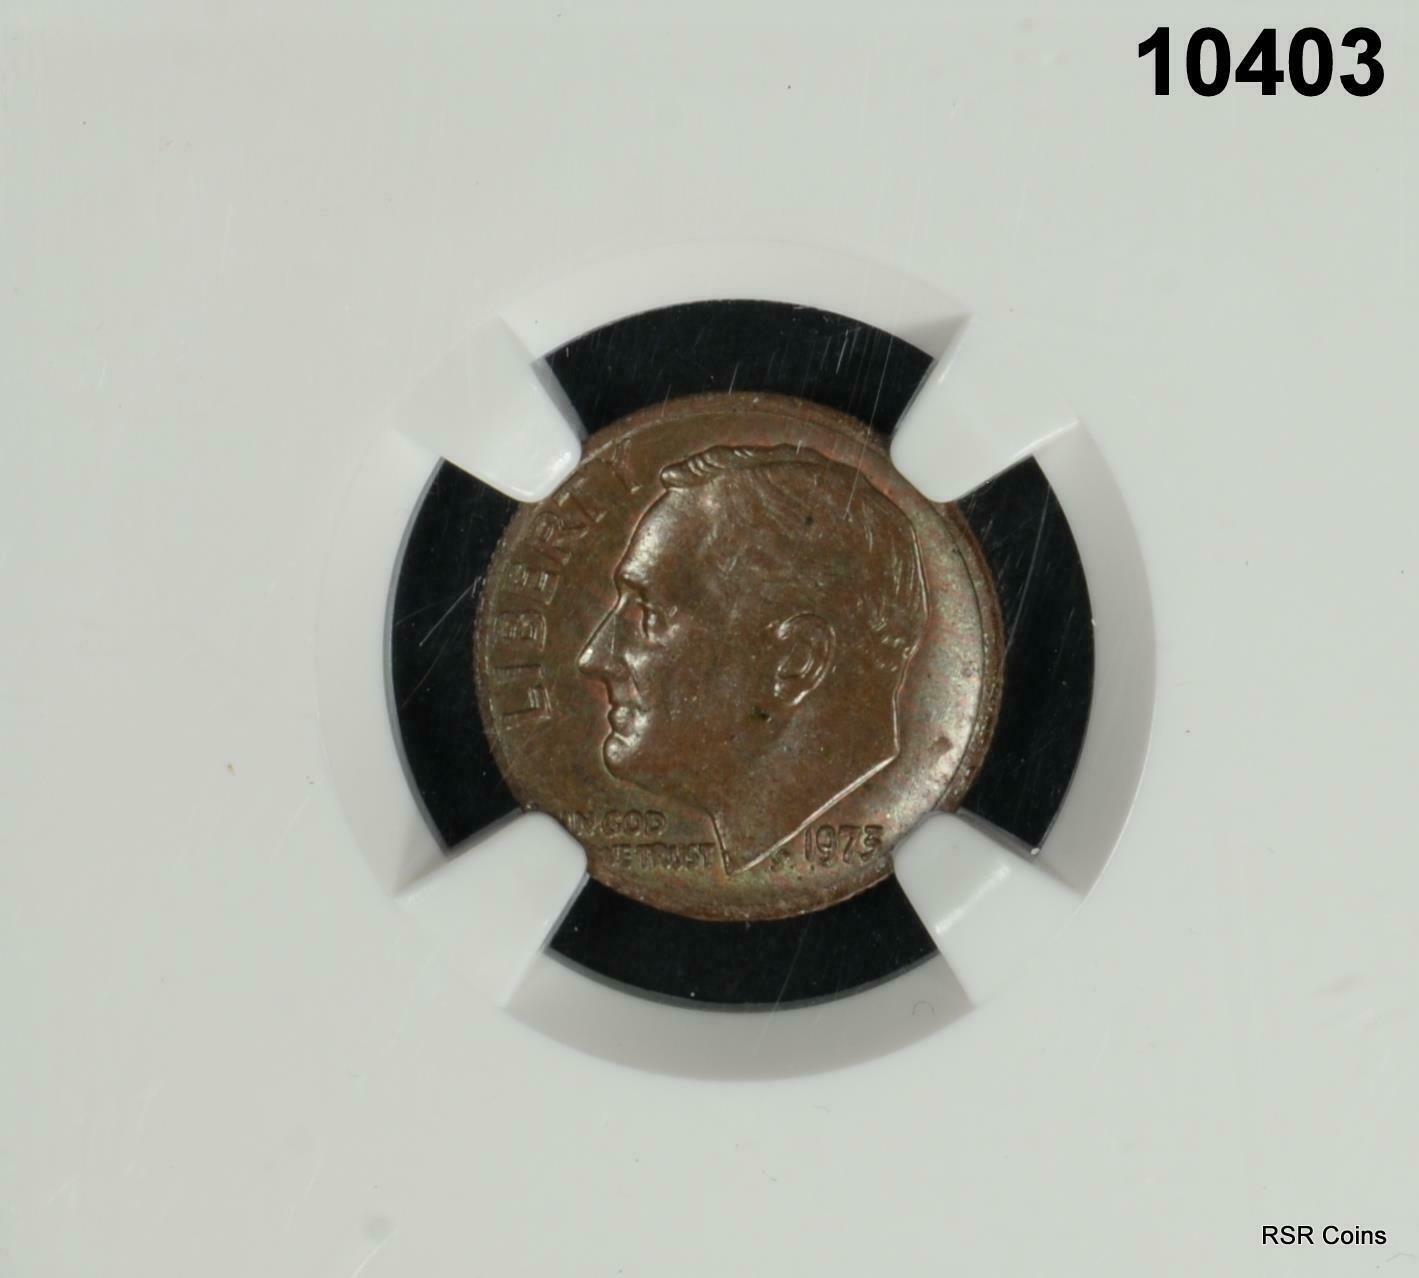 1973 ROOSEVELT DIME MINT ERROR NGC CERTIFIED OBVERSE CLAD LAYER MISSING #10403